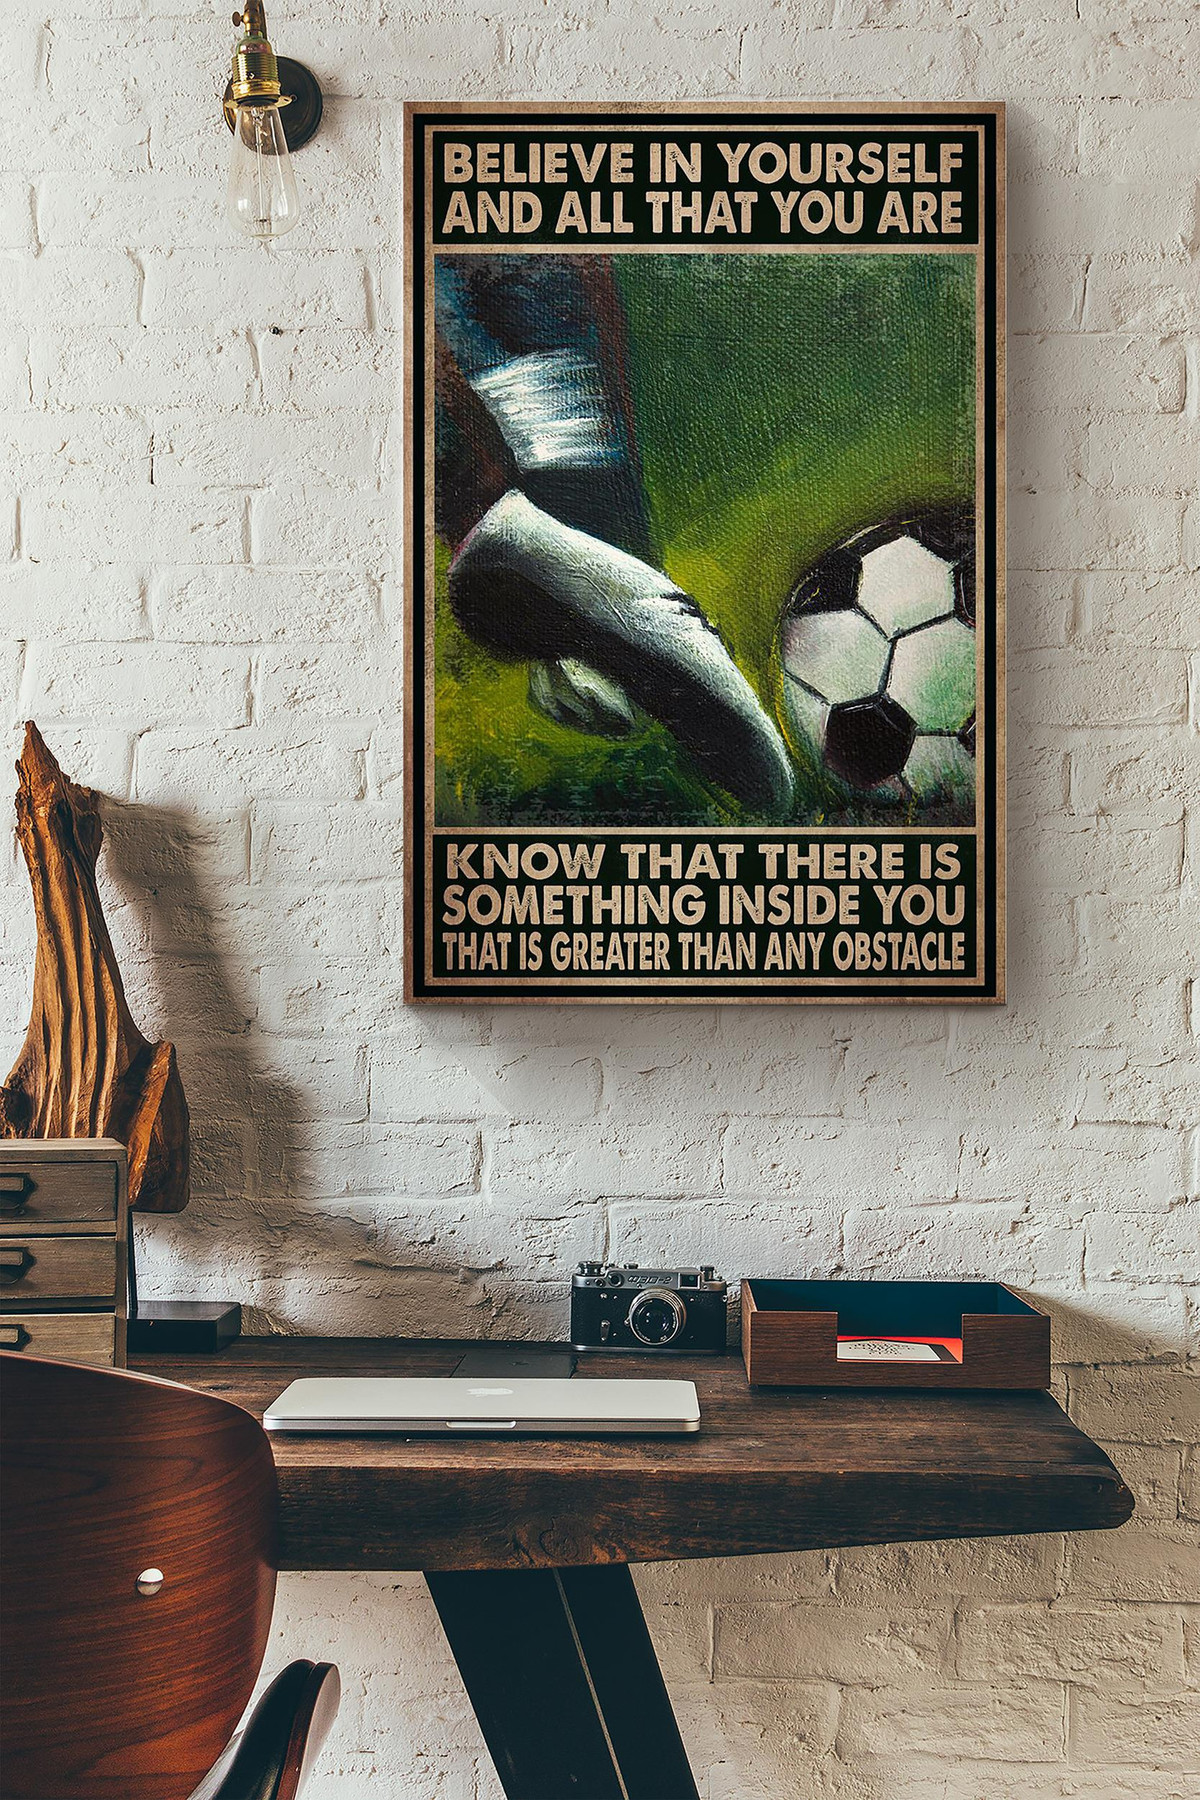 Believe In Your Self And What You Are Know That Thre Is Some Thing Inside You That Is Greater Than Any Obstacle Soccer Canvas Painting Ideas, Canvas Hanging Prints, Gift Idea Framed Prints, Canvas Paintings Wrapped Canvas 8x10